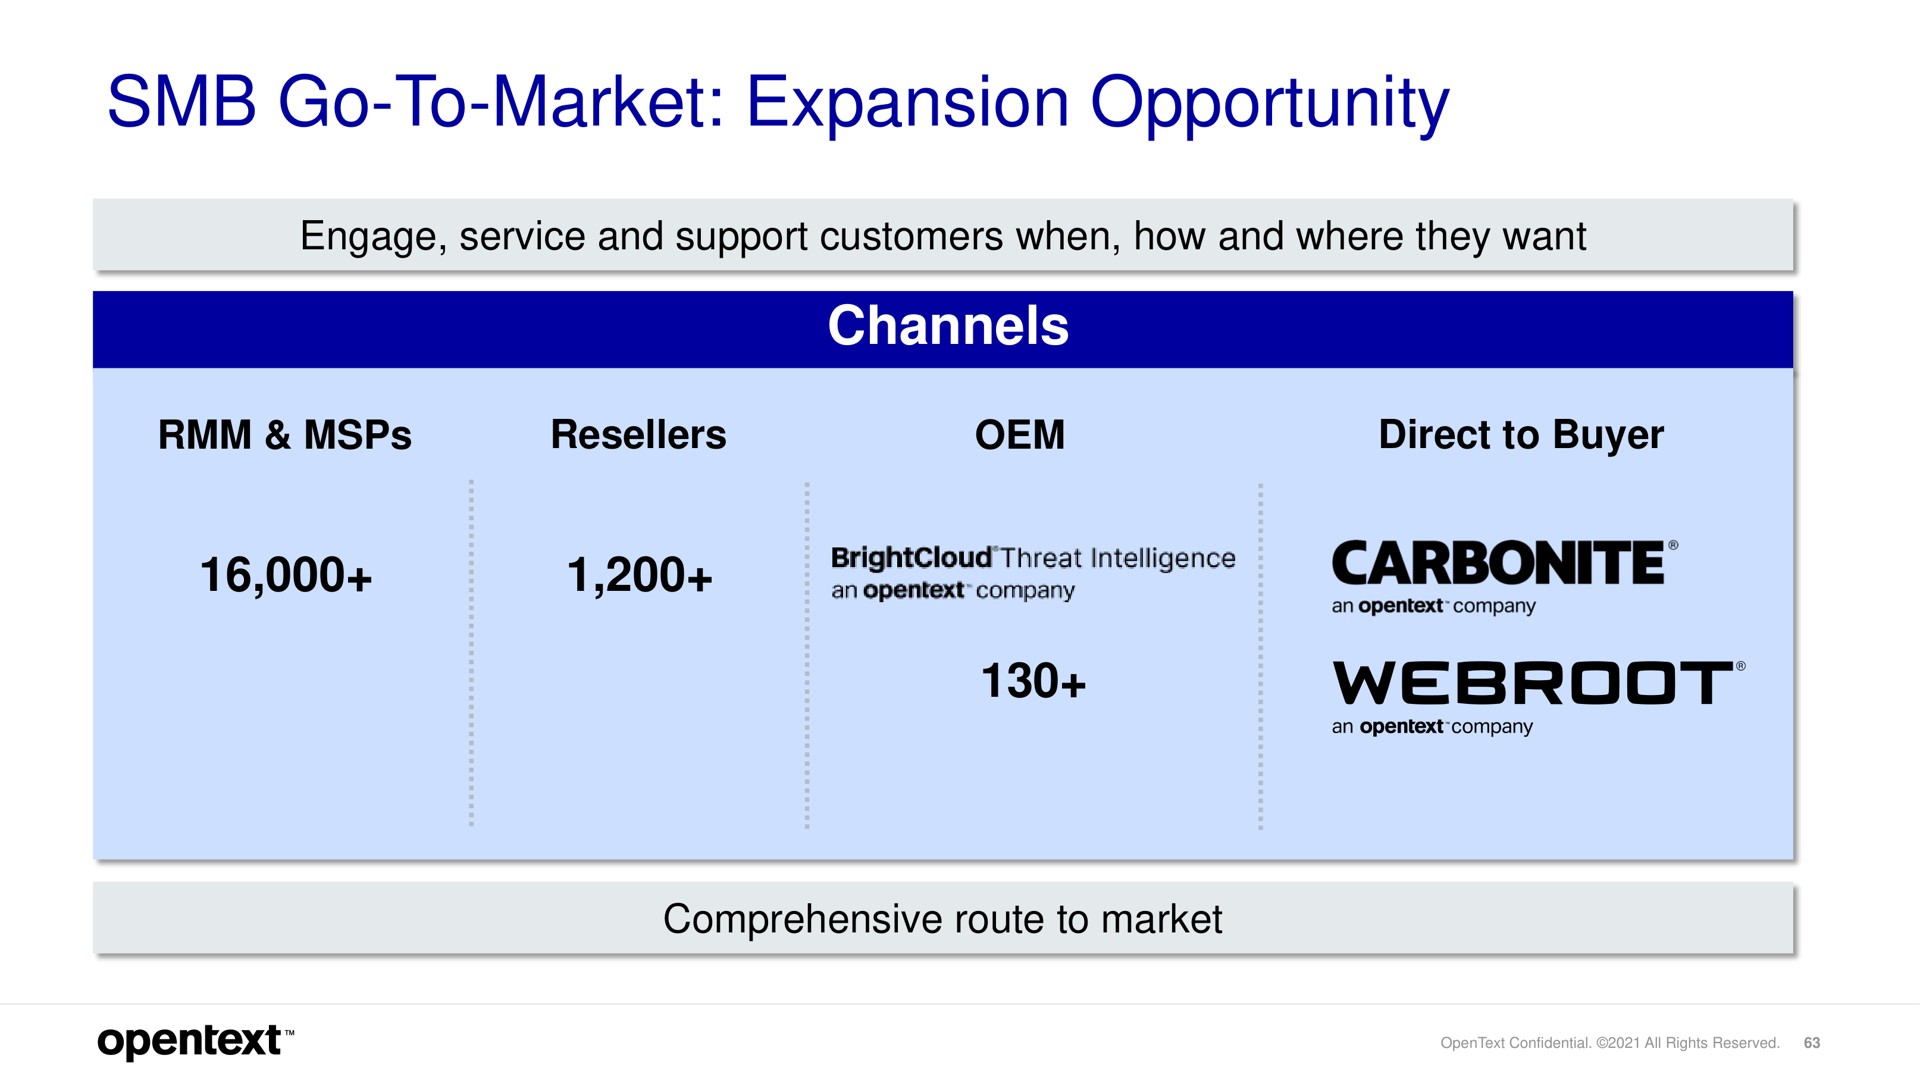 go to market expansion opportunity corners carbonite | OpenText